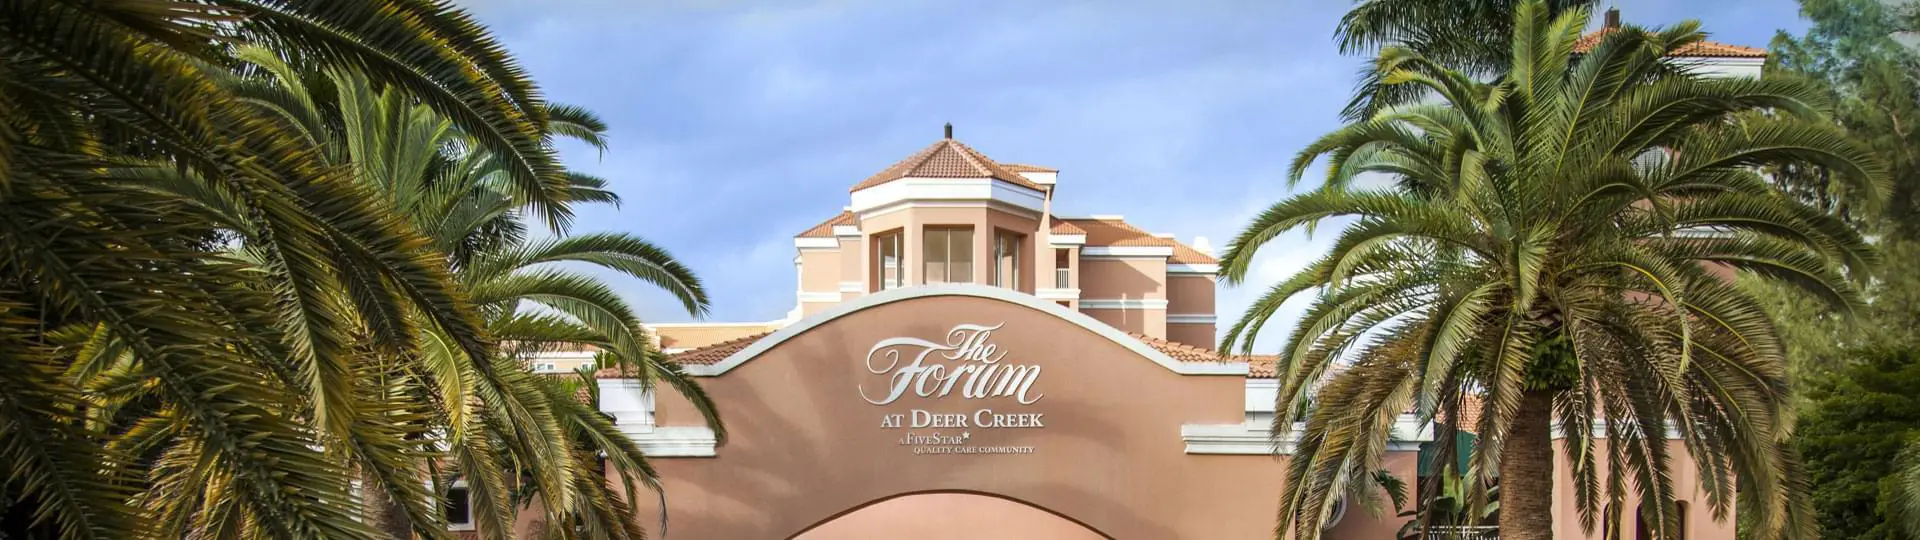 Photo of The Forum at Deer Creek, Assisted Living, Nursing Home, Independent Living, CCRC, Deerfield Beach, FL 1